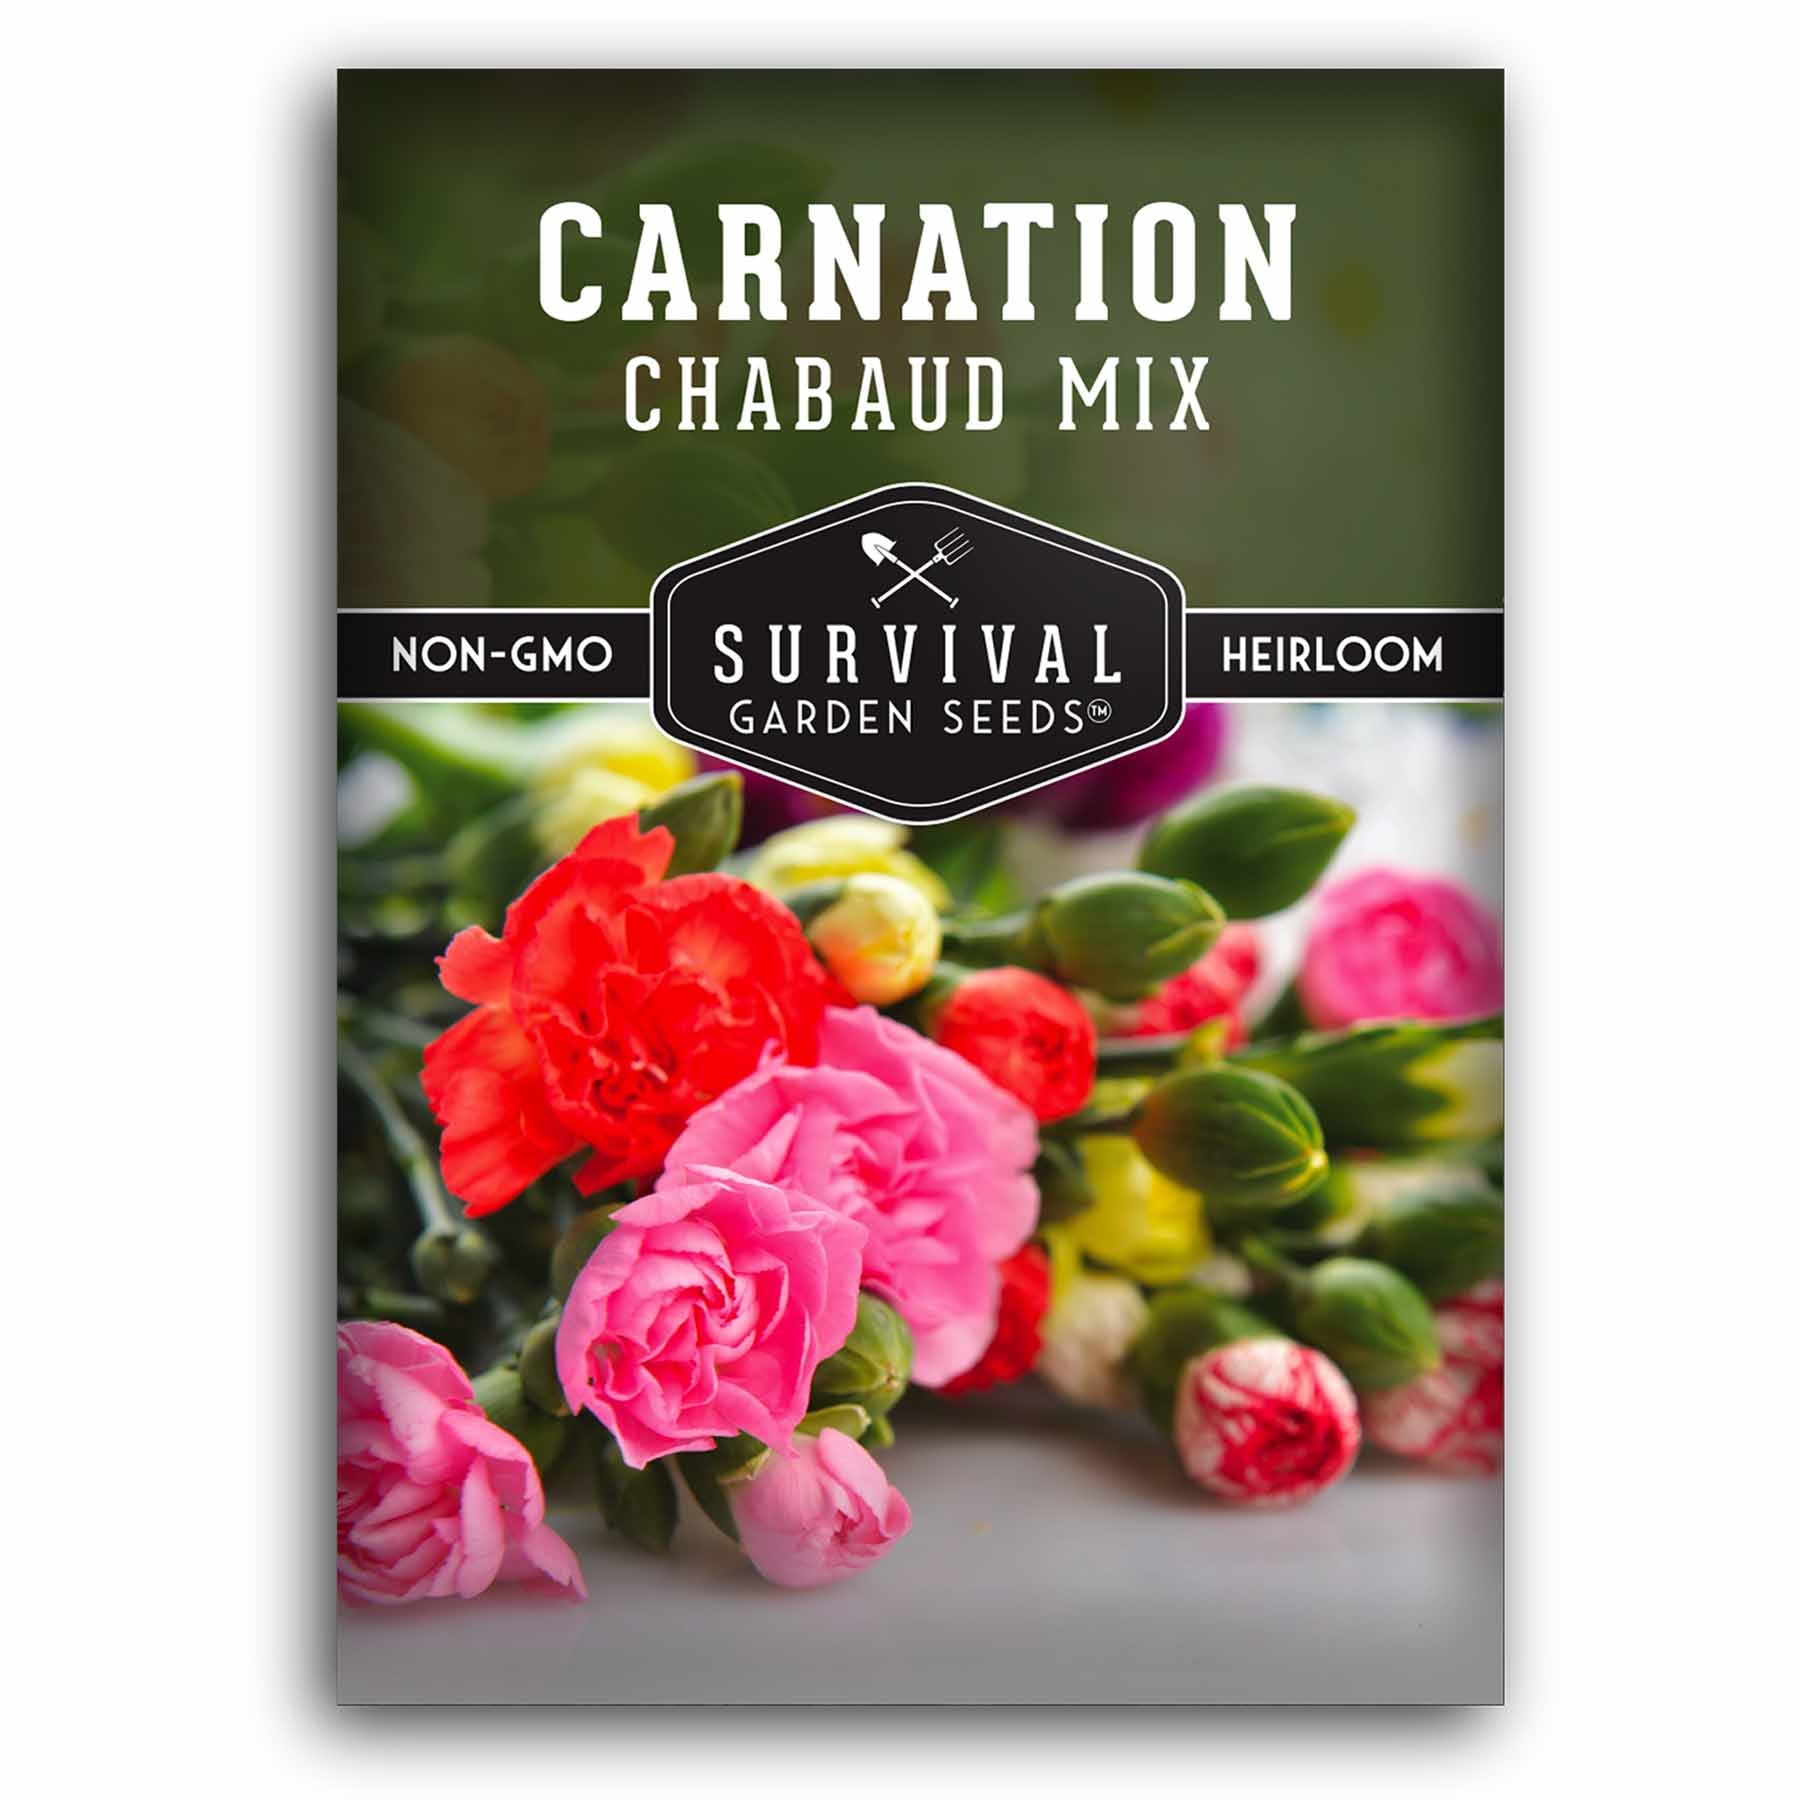 1 packet of Chabaud Mix Carnation flower seeds